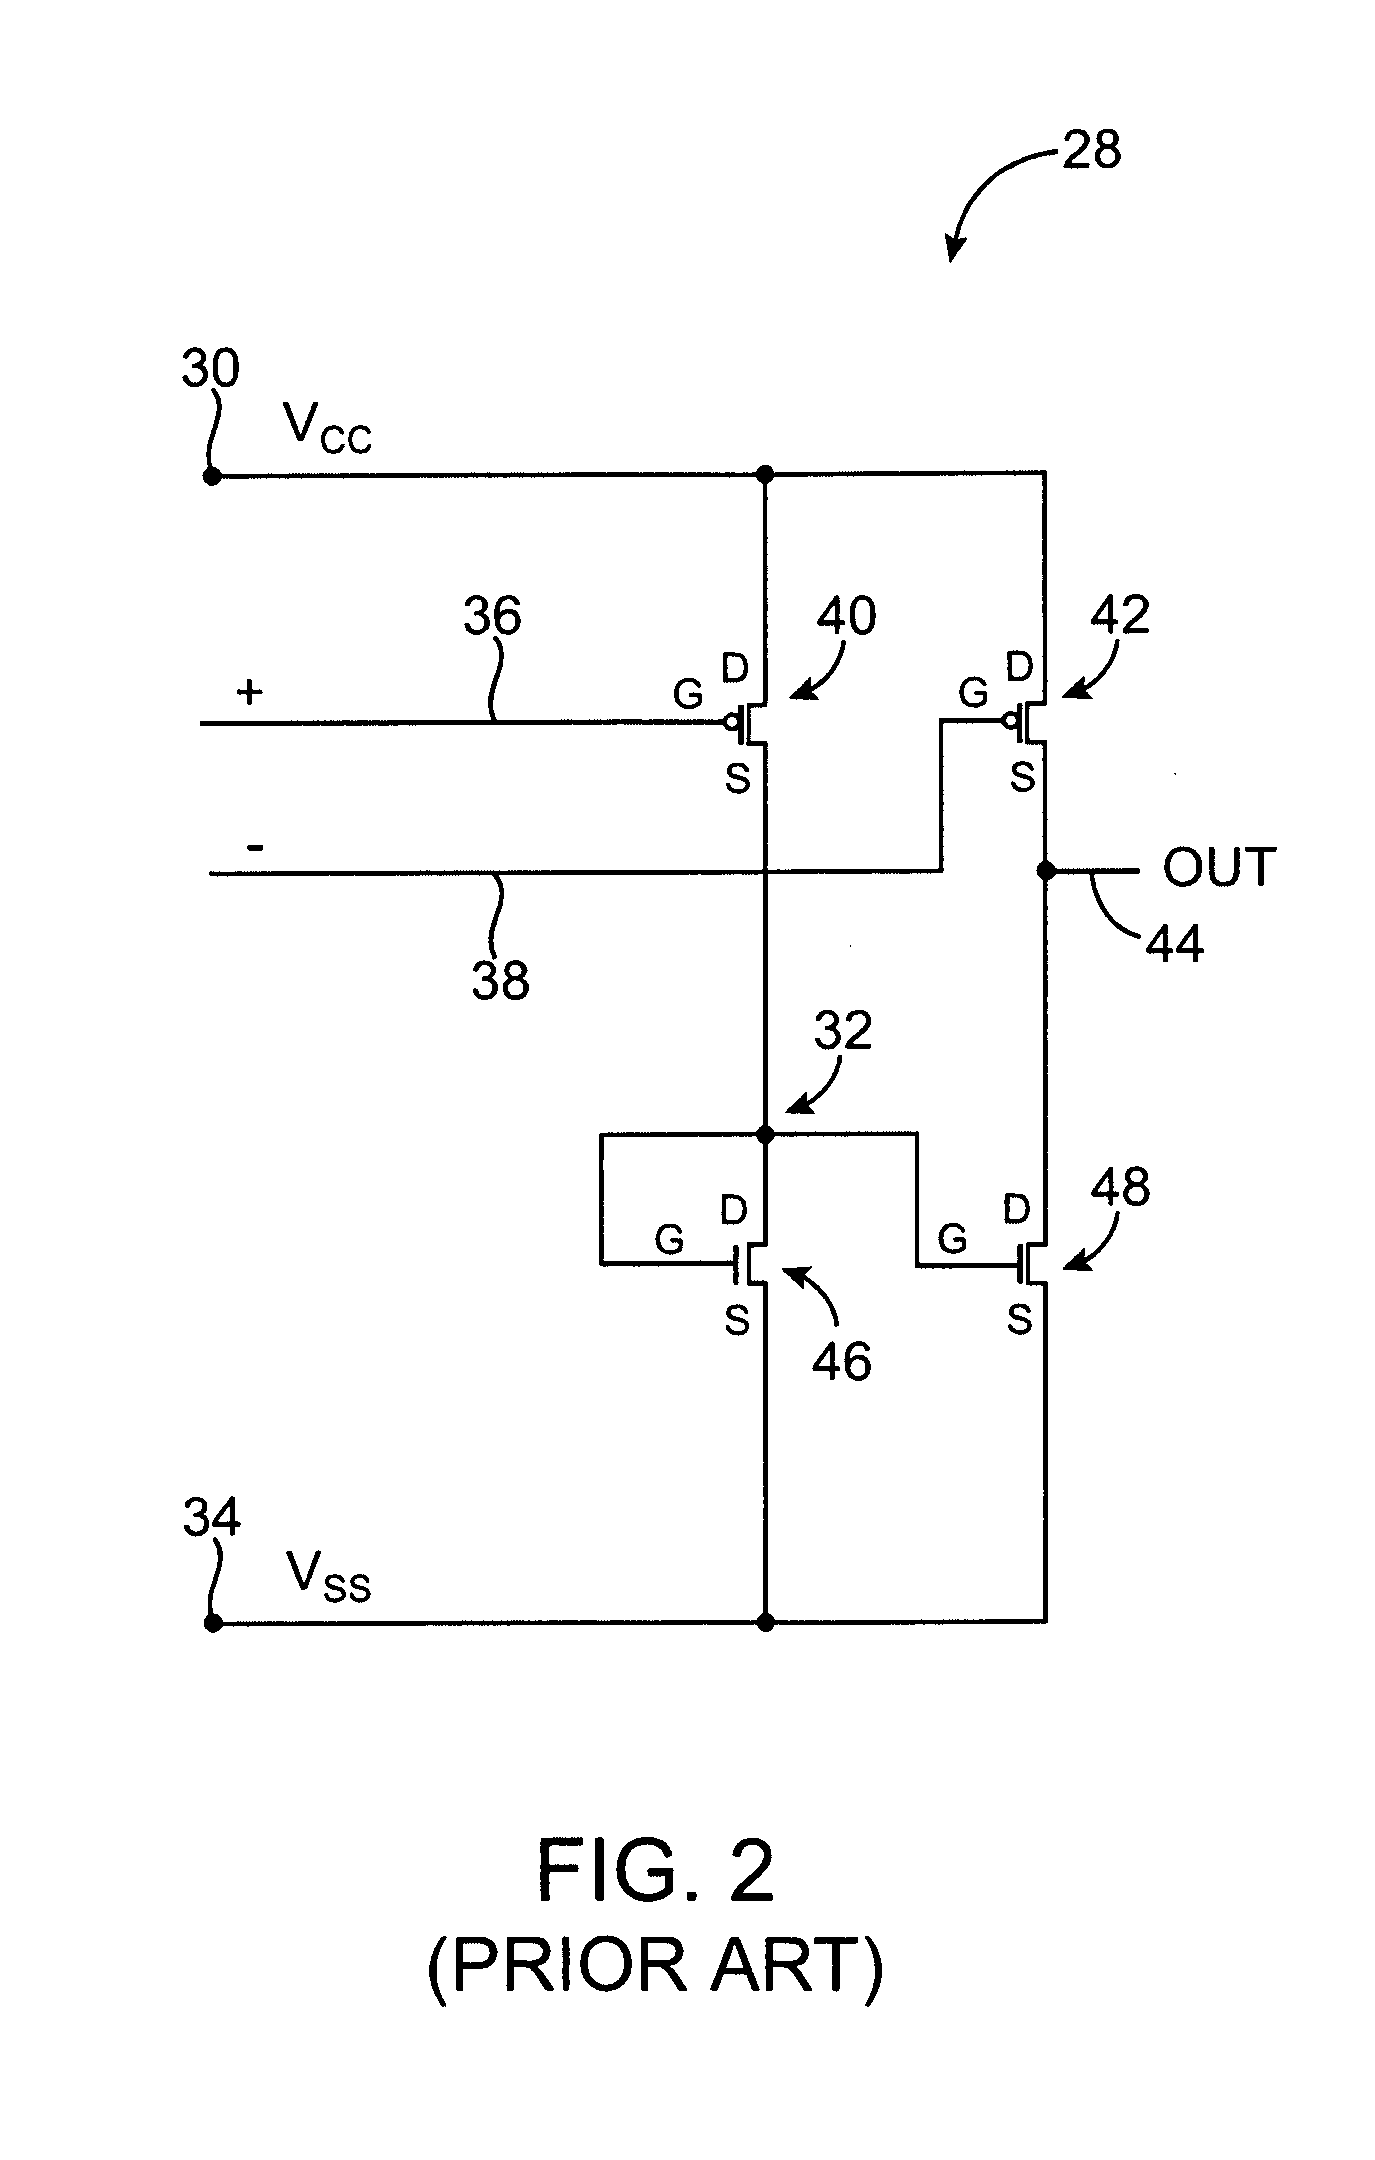 Low-jitter differential-to-single-ended data conversion circuits